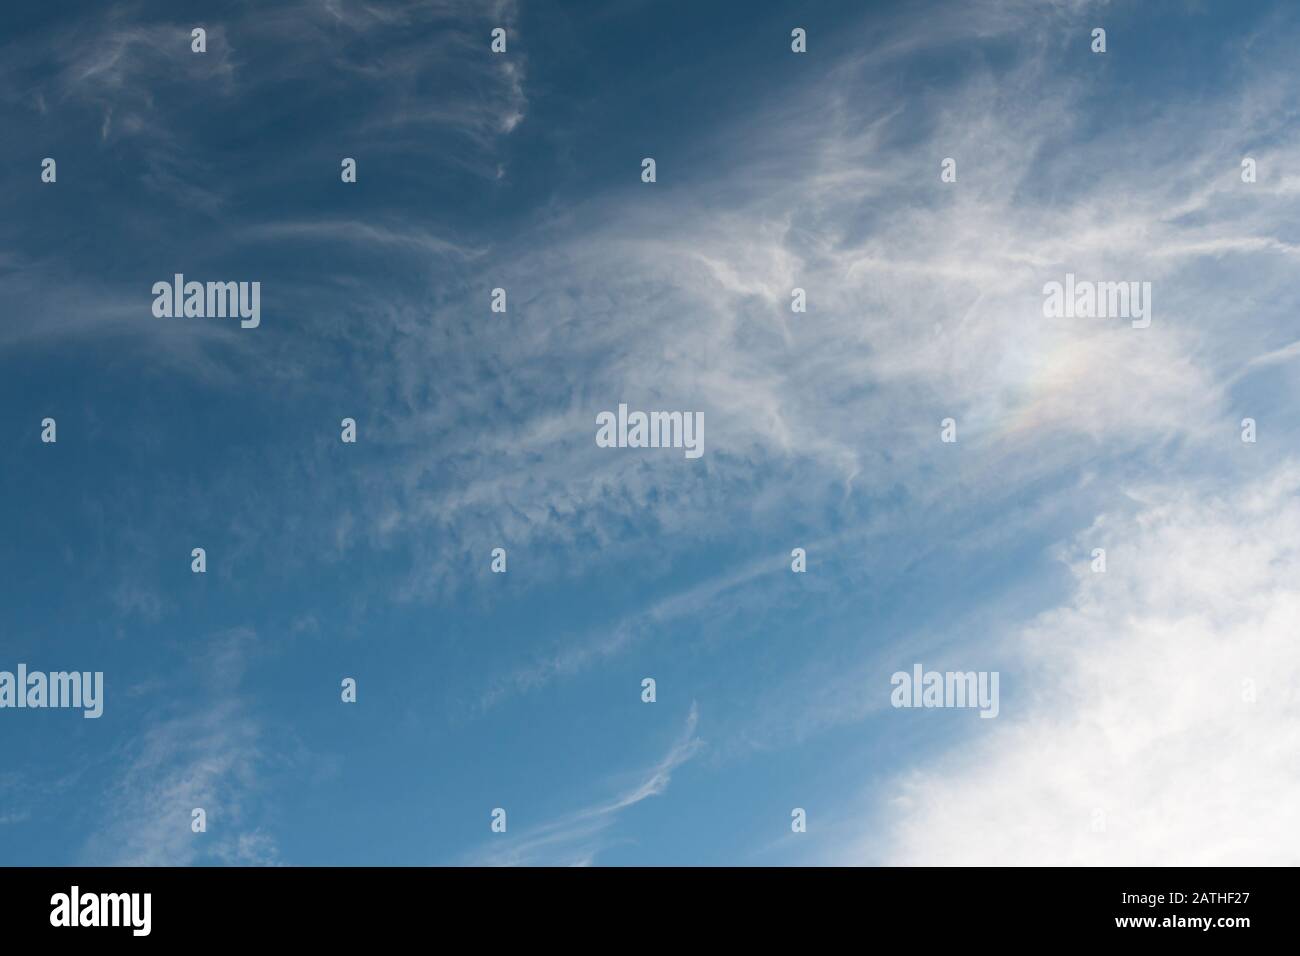 Blue summer sky with whispy white high altitude cirrus clouds Stock Photo